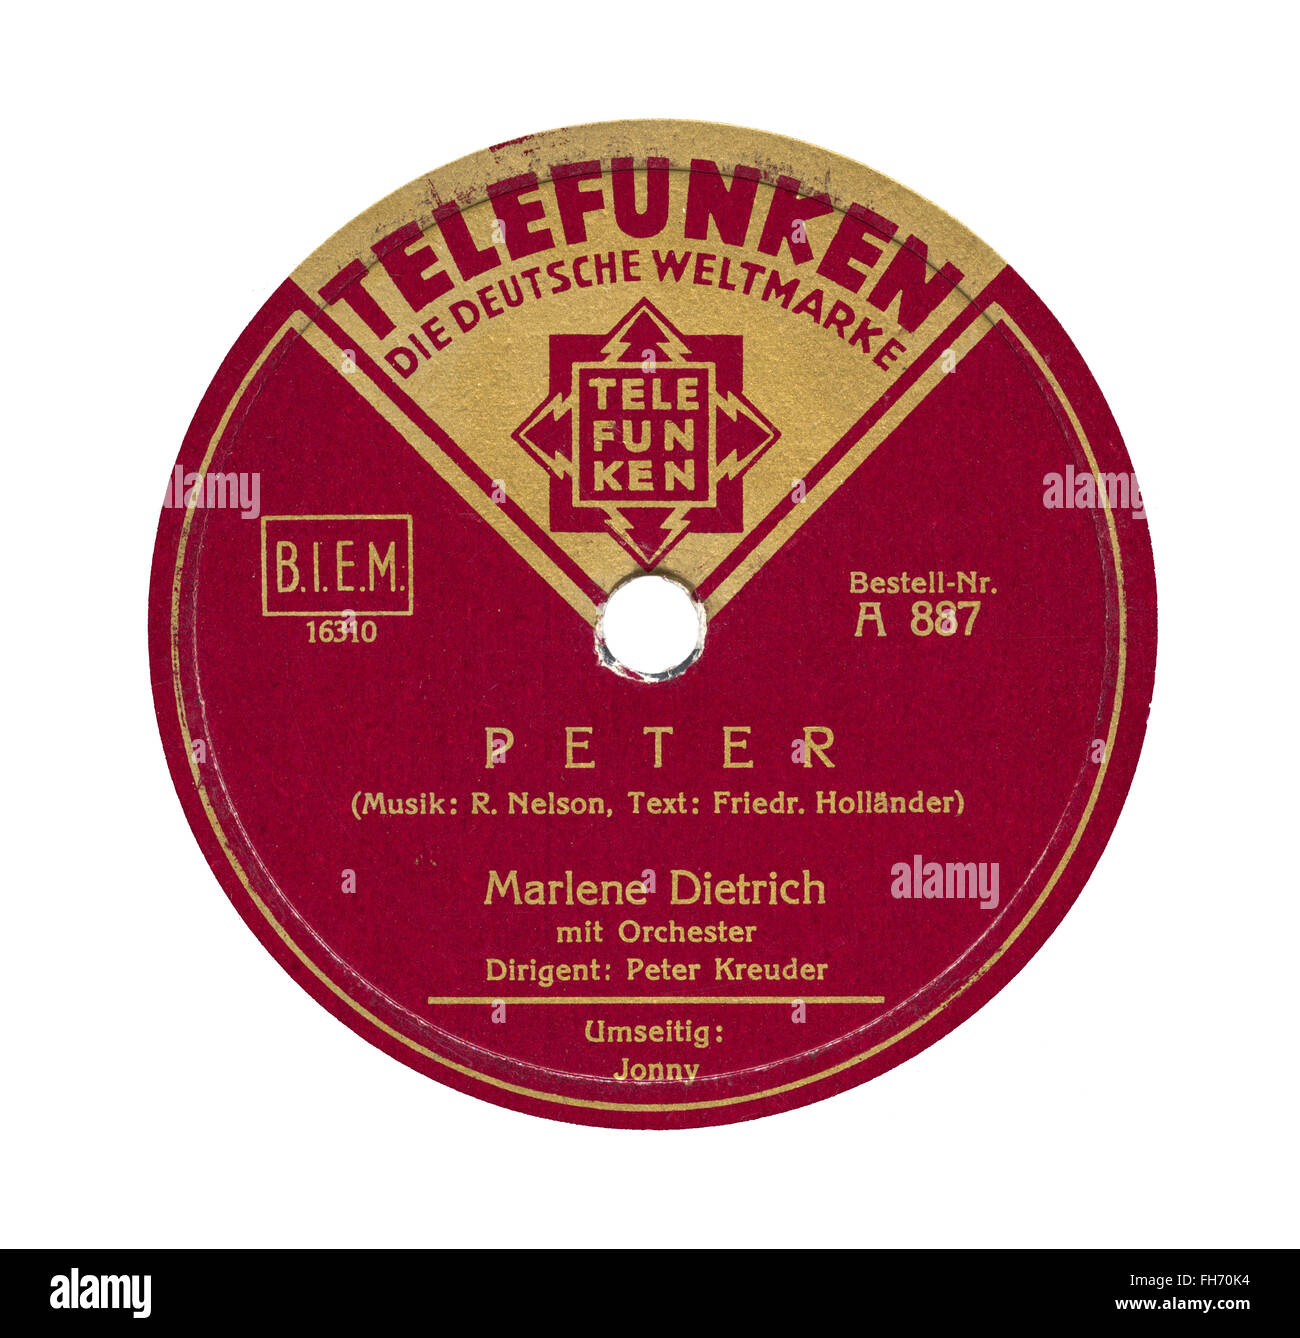 Marlene Dietrich 78 rpm Telefunken record label isolated on white - released September 1931 (Germany) “Peter” Stock Photo